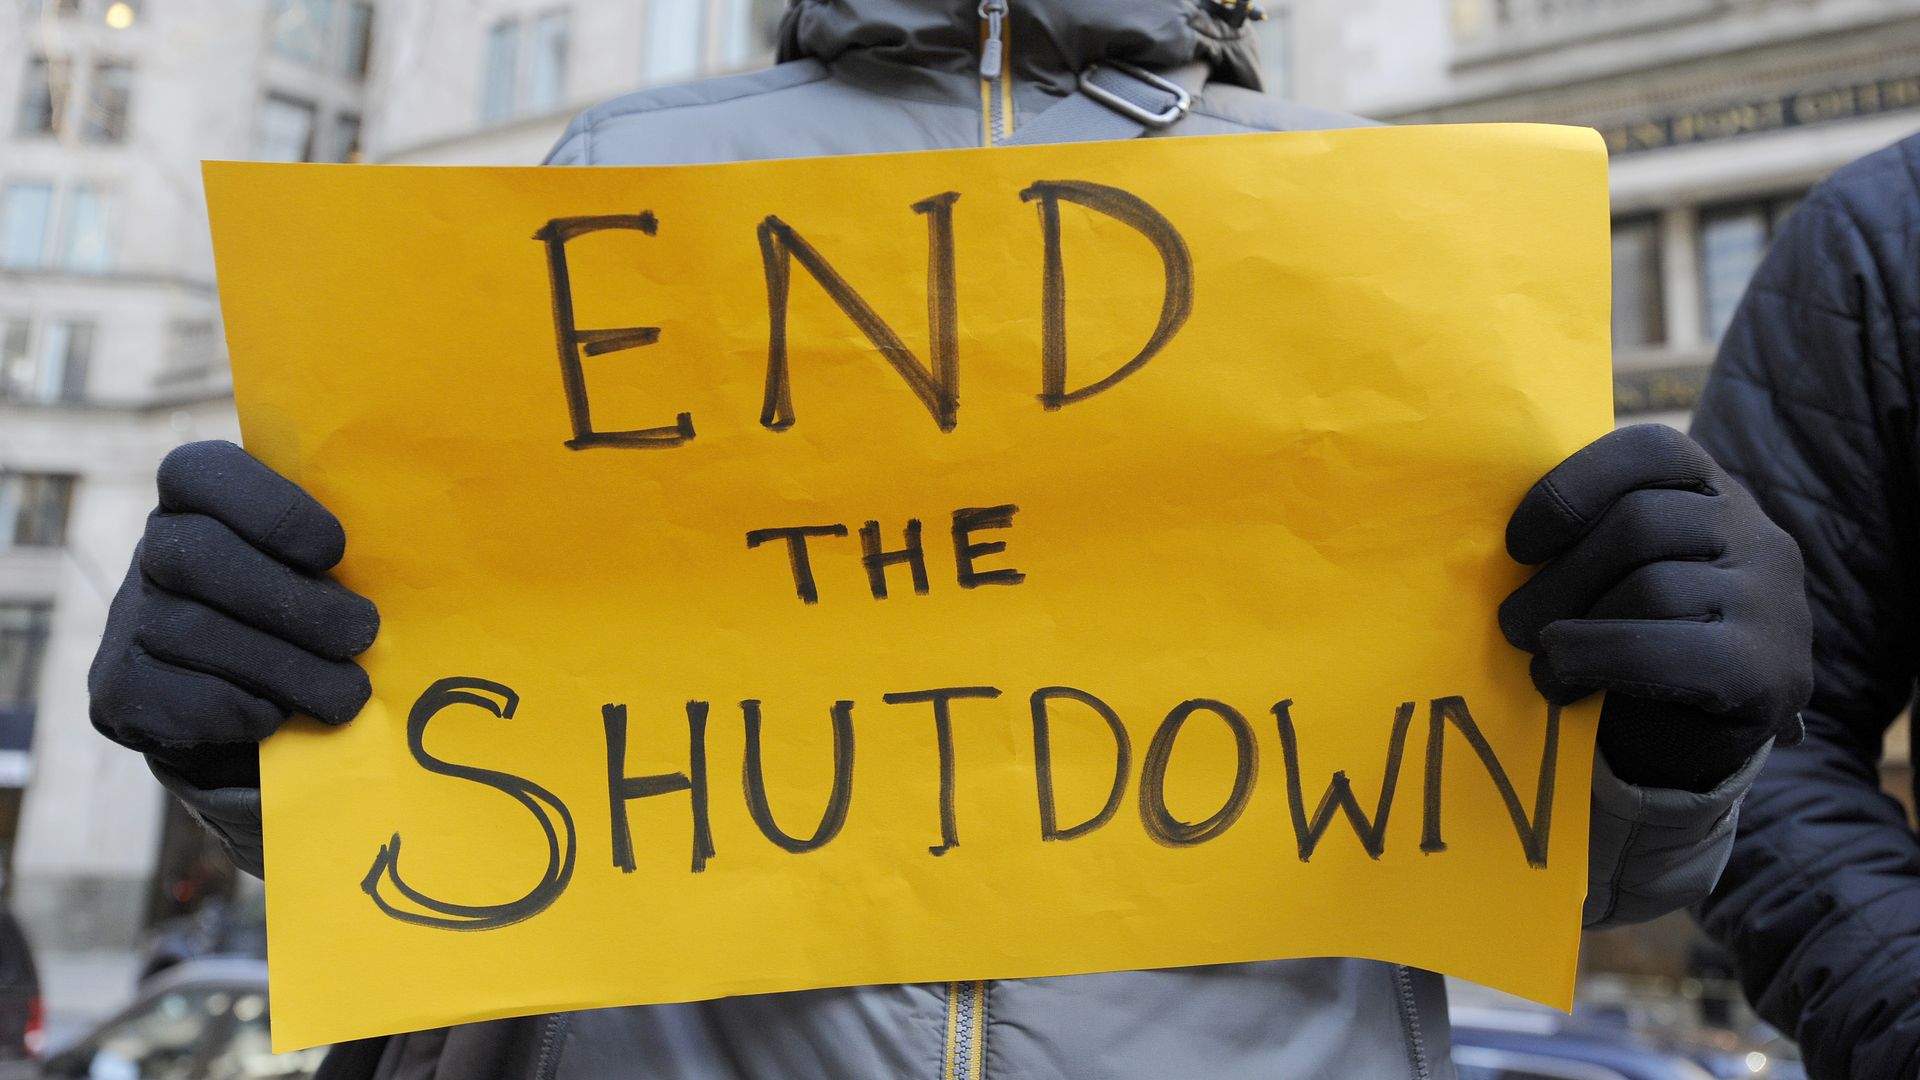 Sign reads "END THE SHUTDOWN."